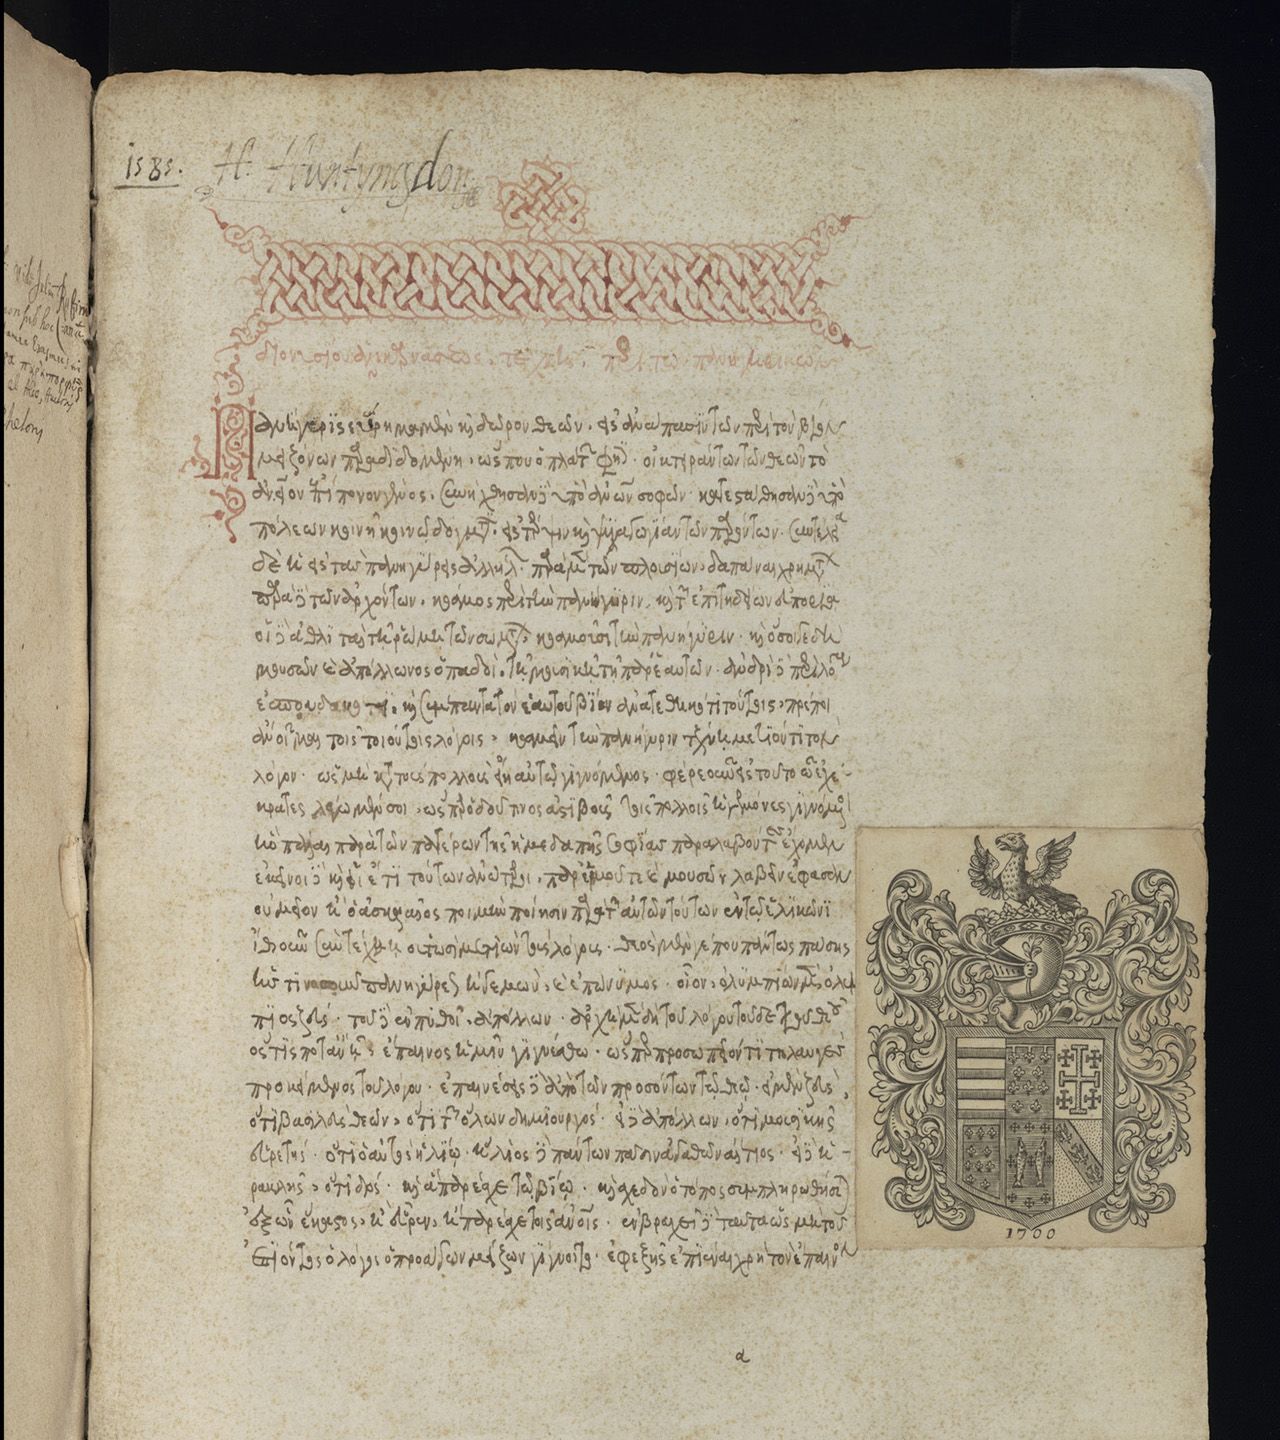 page from MS Queens 33, Huntingdon's signature visible at the top